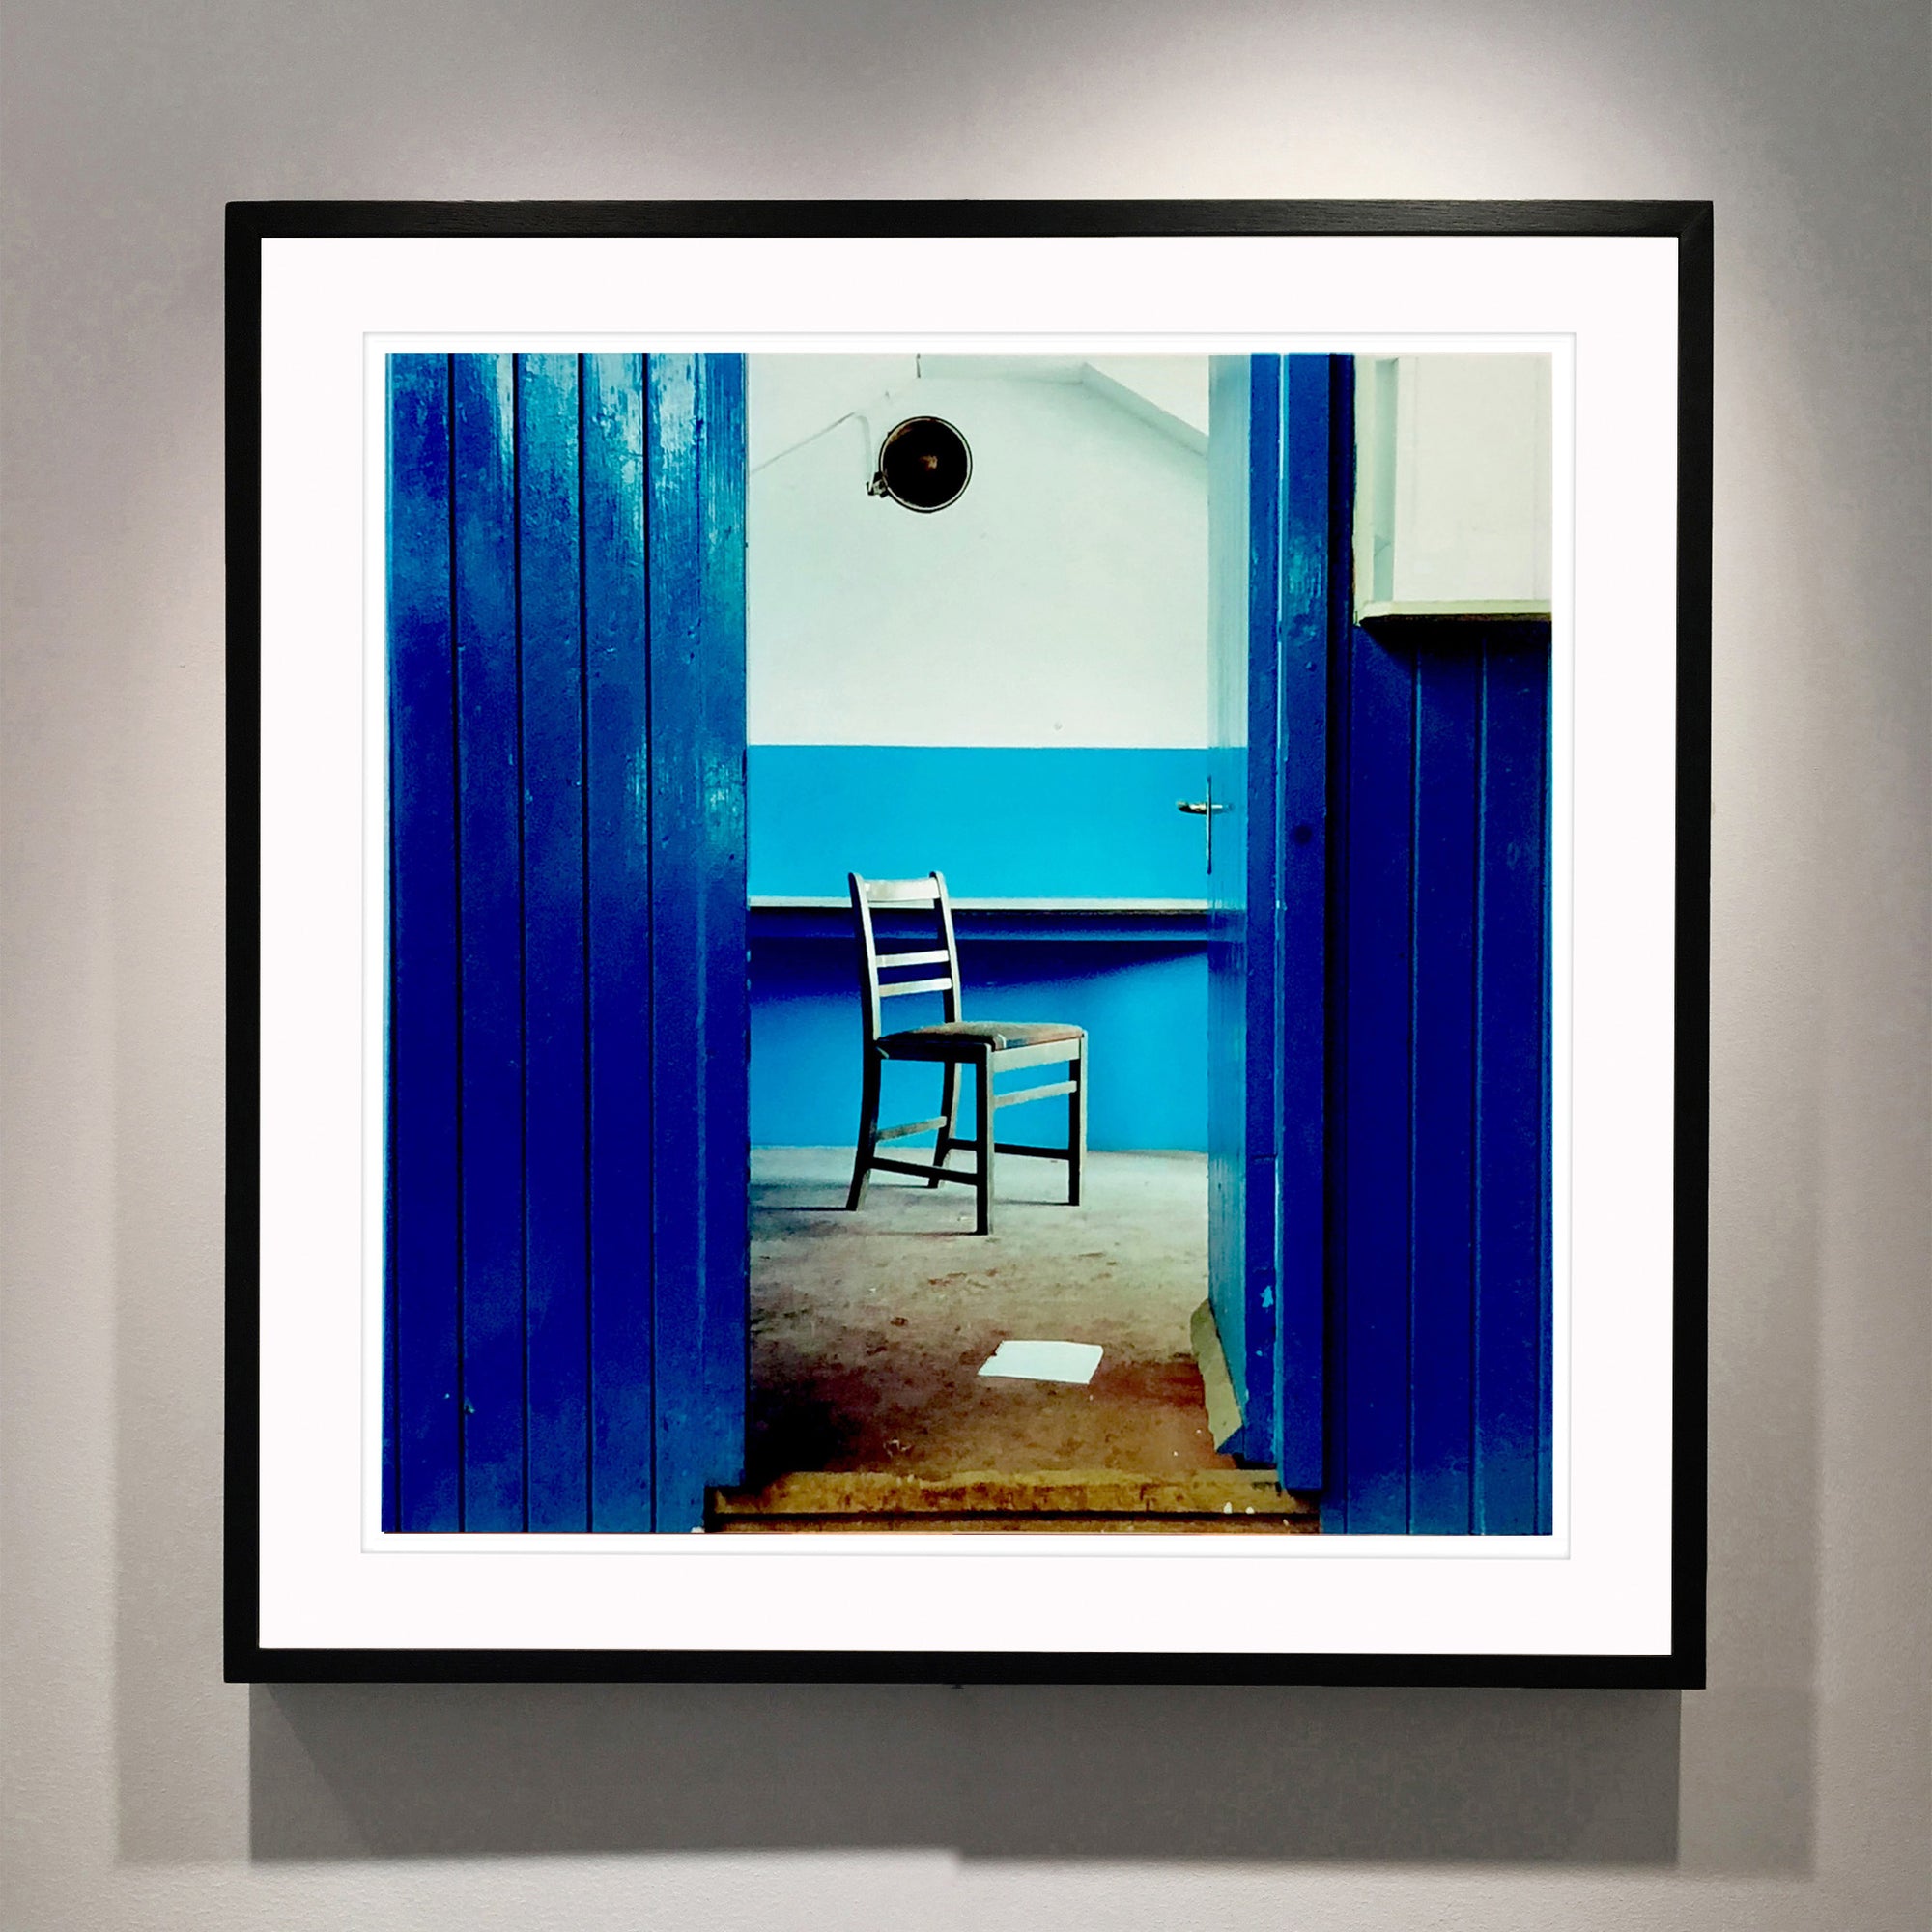 A photograph of a chair which sits in a derelict factory in a colour block blue painted room, the perspective creates depth.